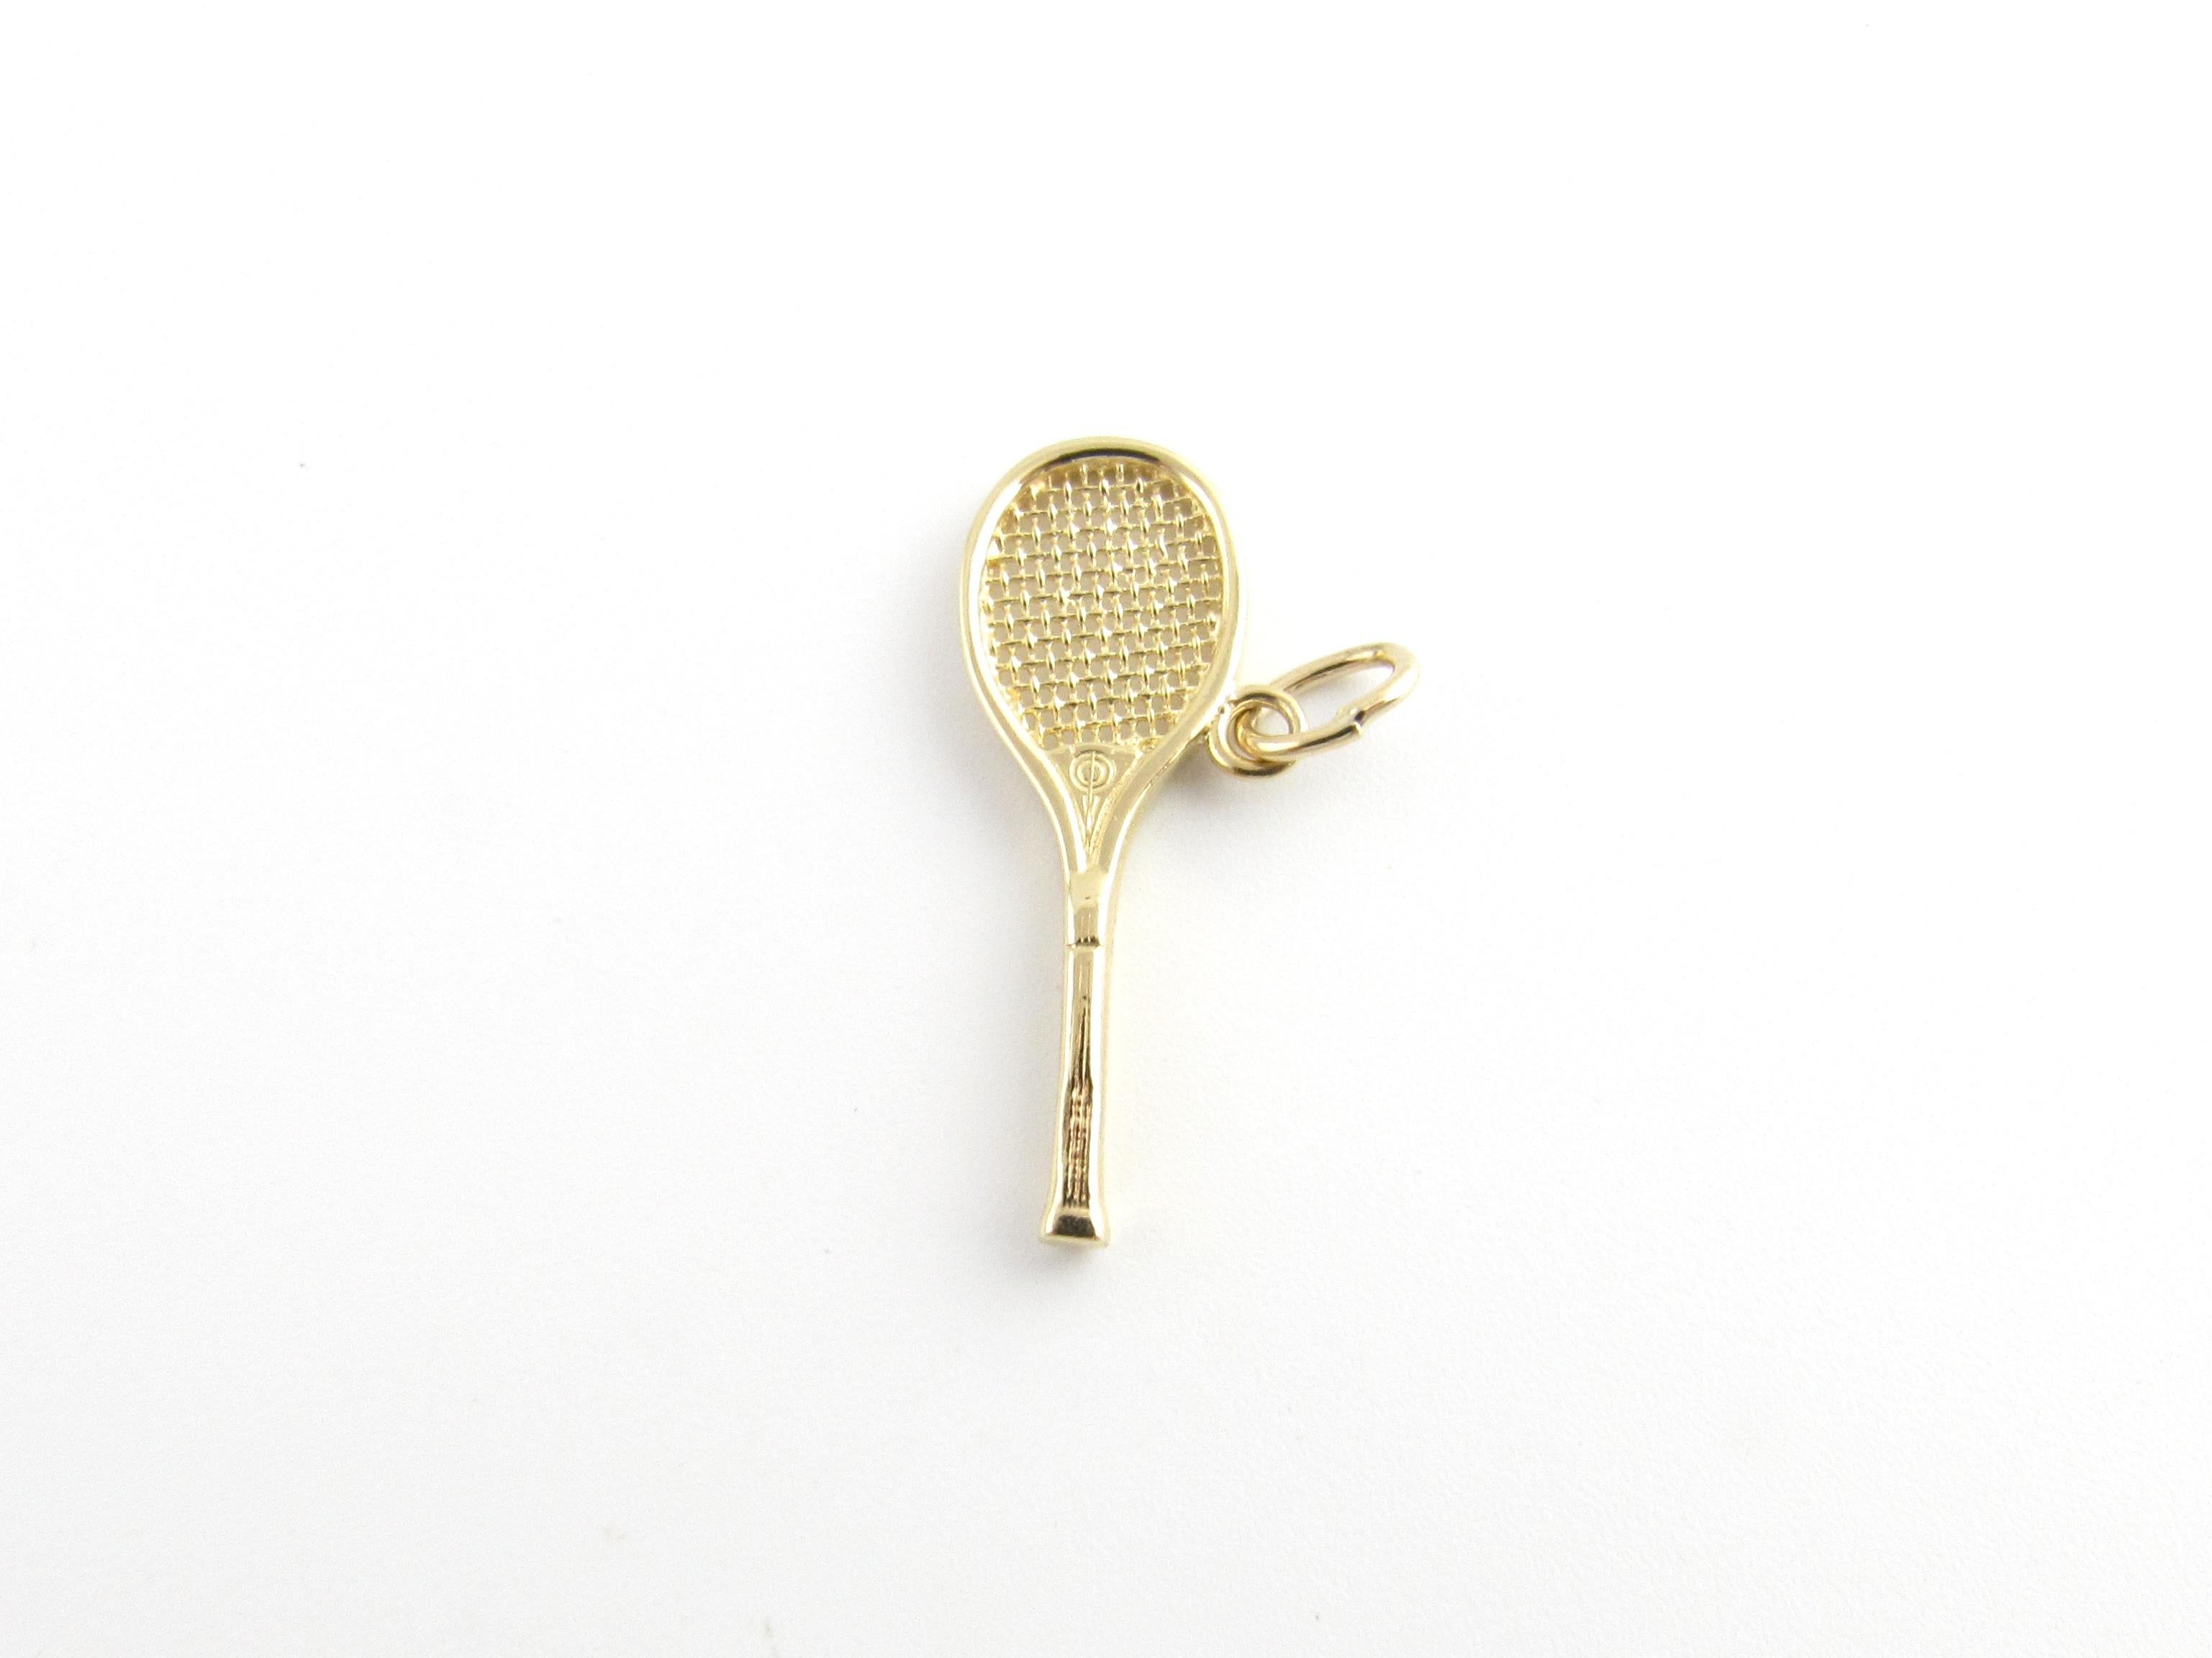 Vintage 14 Karat Yellow Gold Tennis Racket Charm

Tennis, anyone?

This lovely 3D charm features a miniature tennis racket meticulously detailed in 14K yellow gold.

Size: 28 mm x 10 mm Weight: 1.0 dwt. / 1.6 gr. Acid tested for 14K gold.

Very good